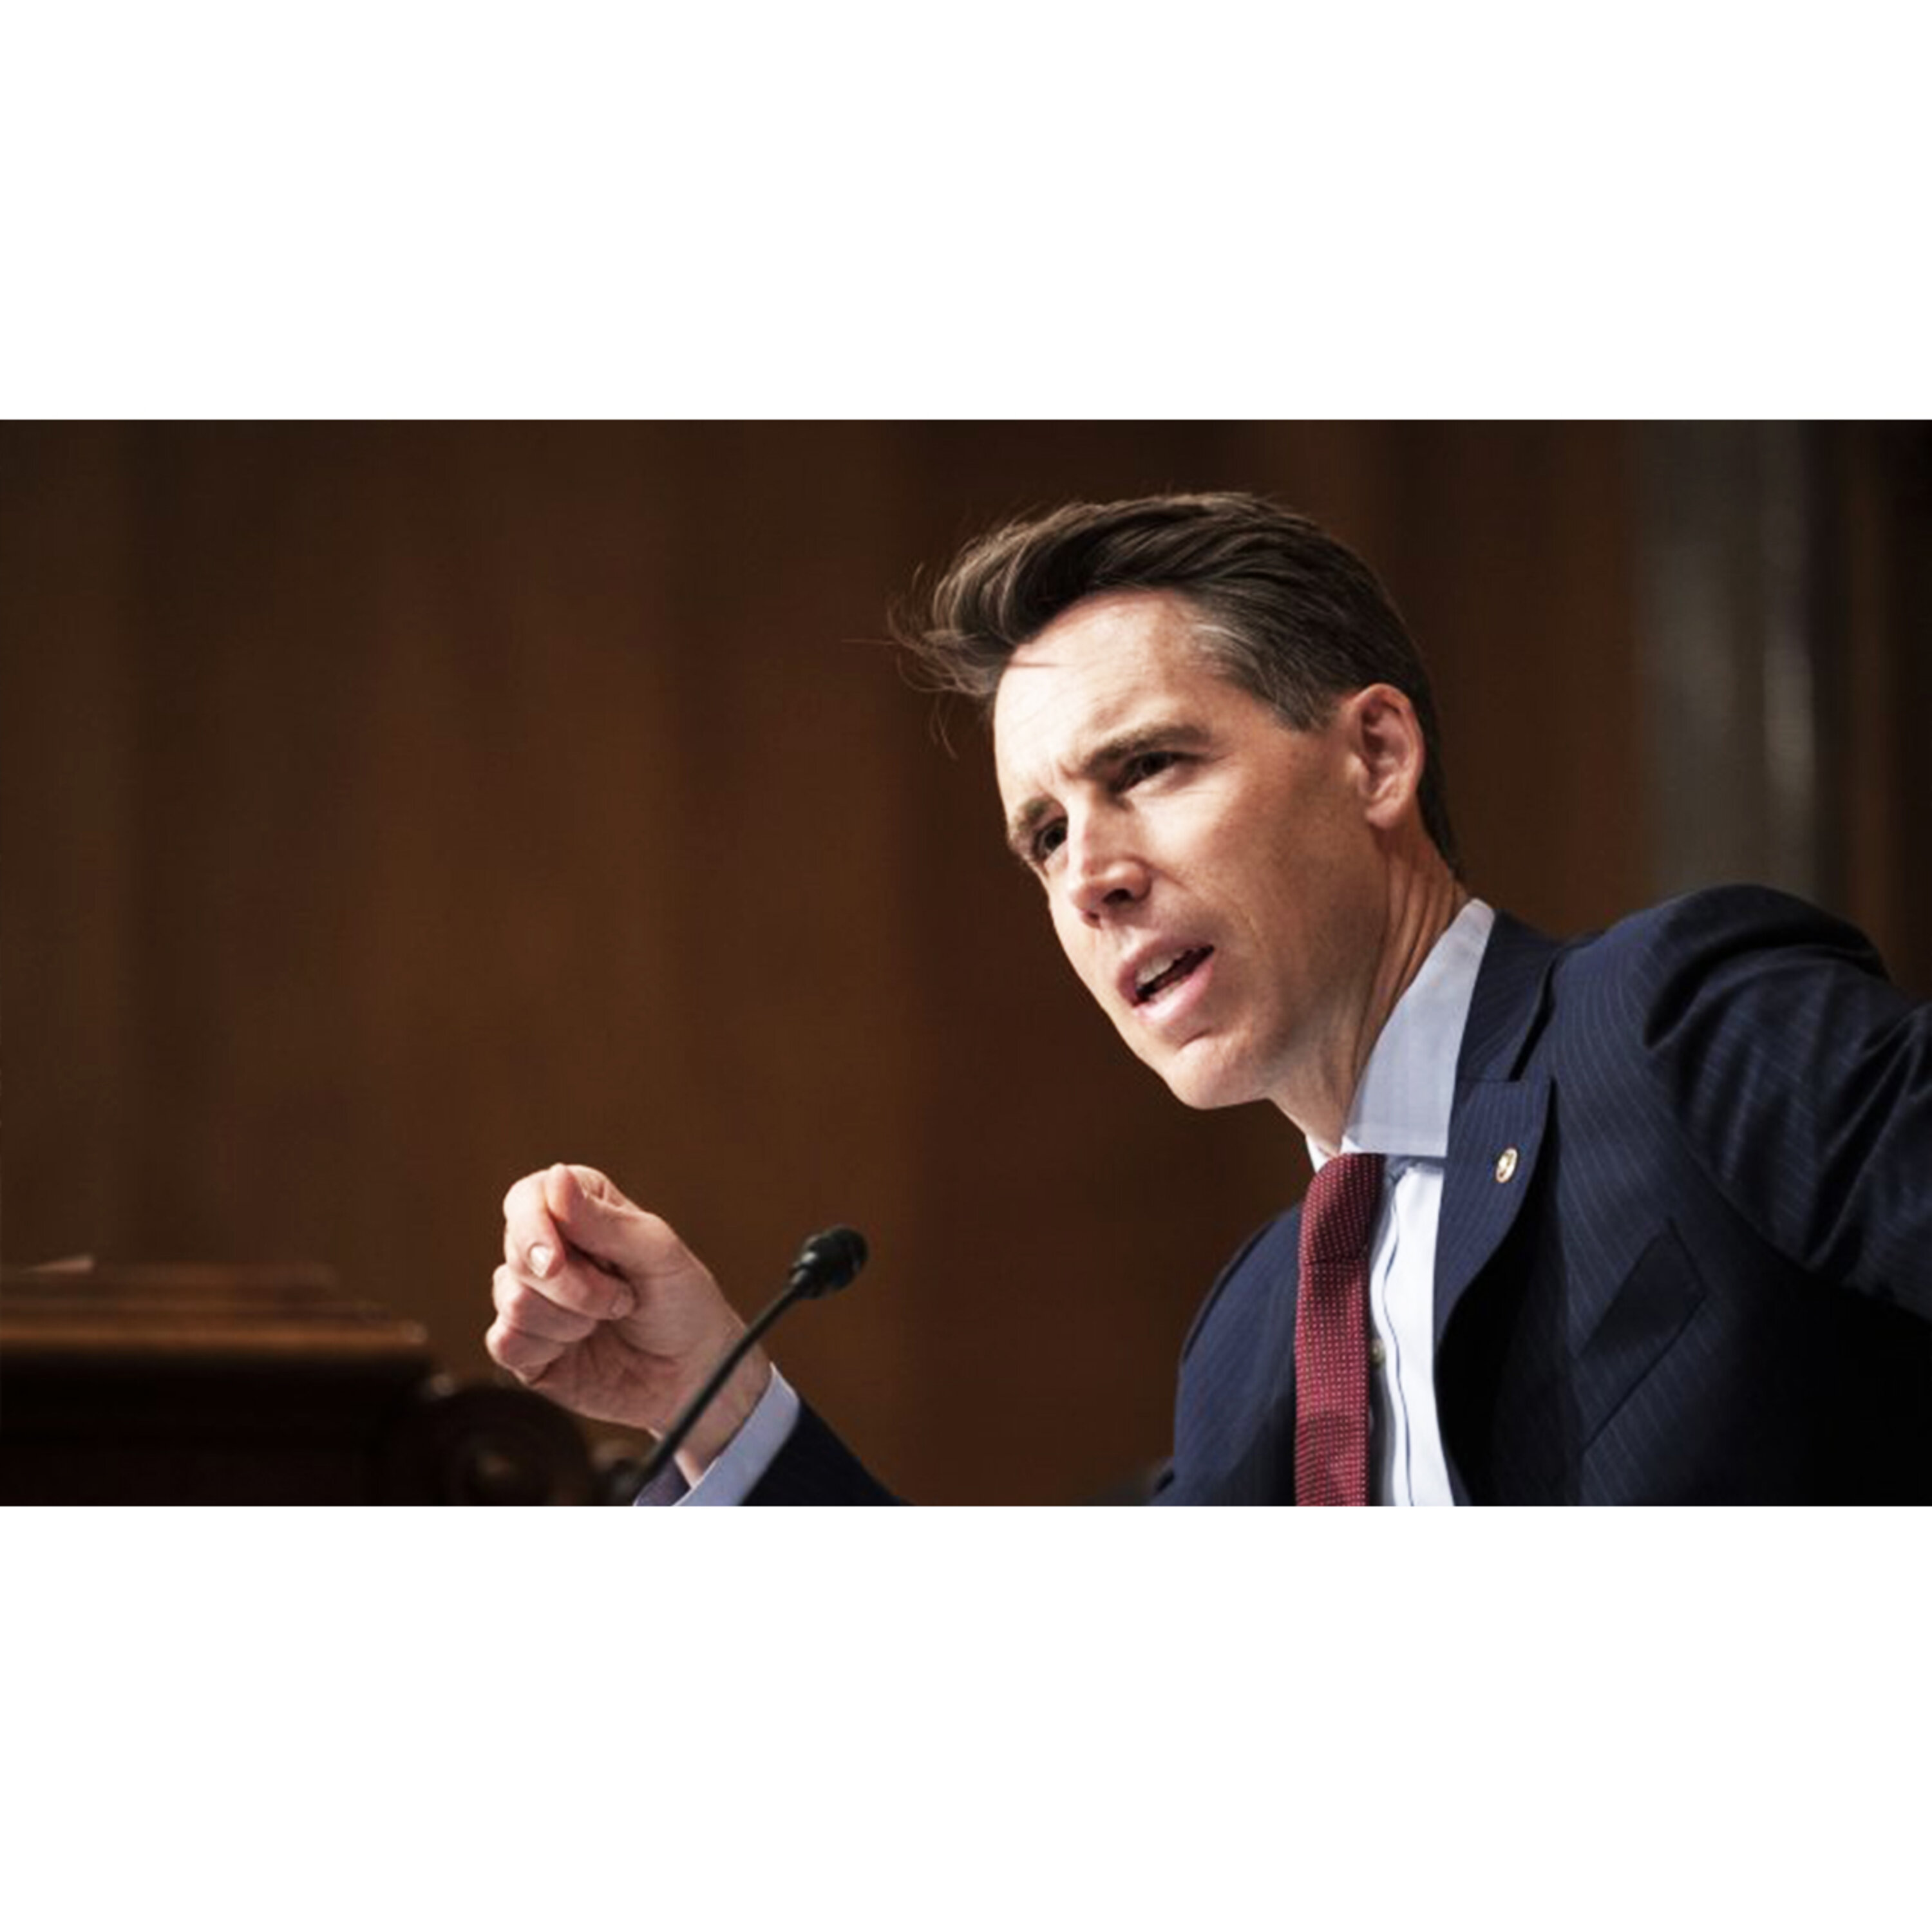 Evil 3 Letter Agencies that Start with "F" with Sen. Josh Hawley